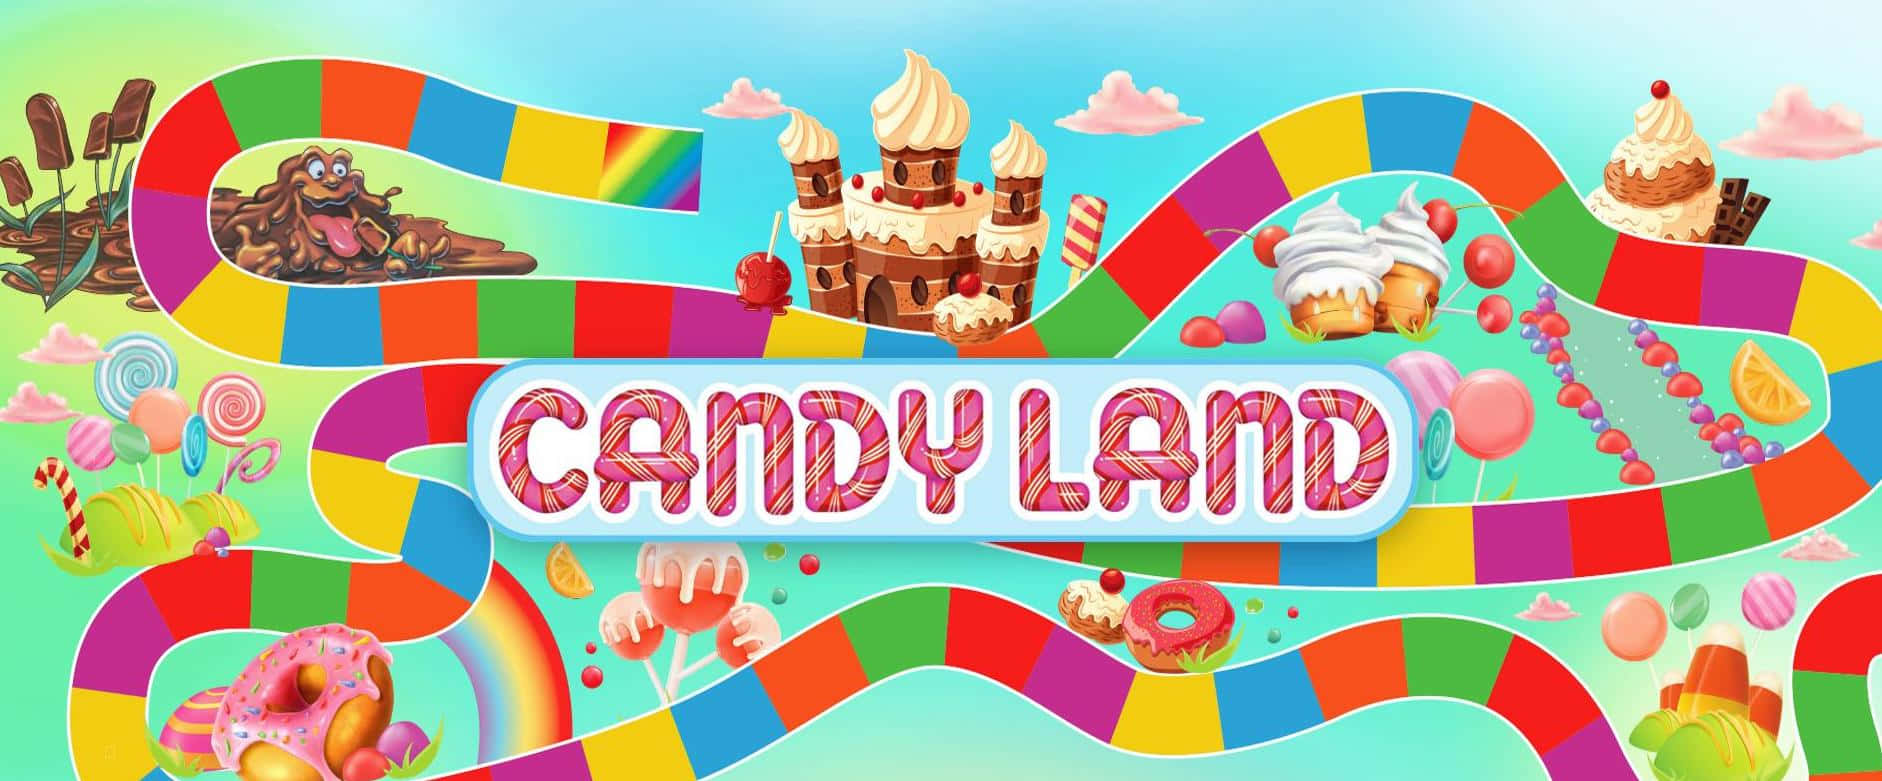 Step Into a World of Sweetness&Magic with Candyland